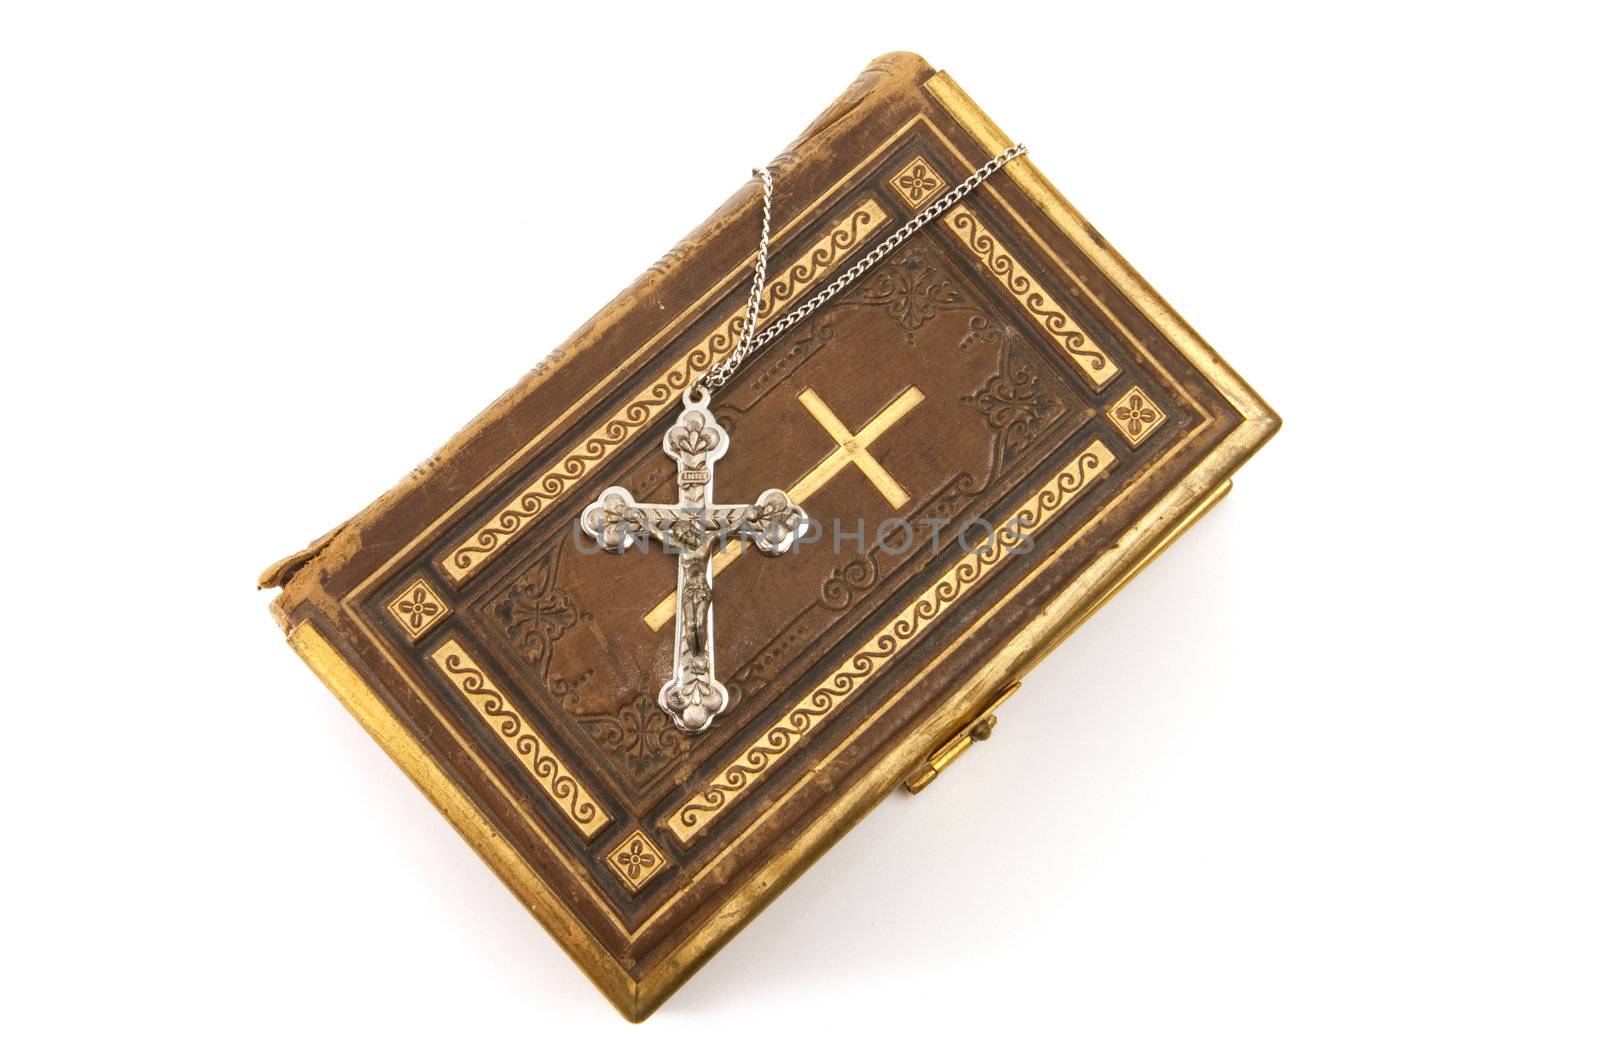 Cross on a antique Christian book with the cross symbol on the cover, isolated on white background